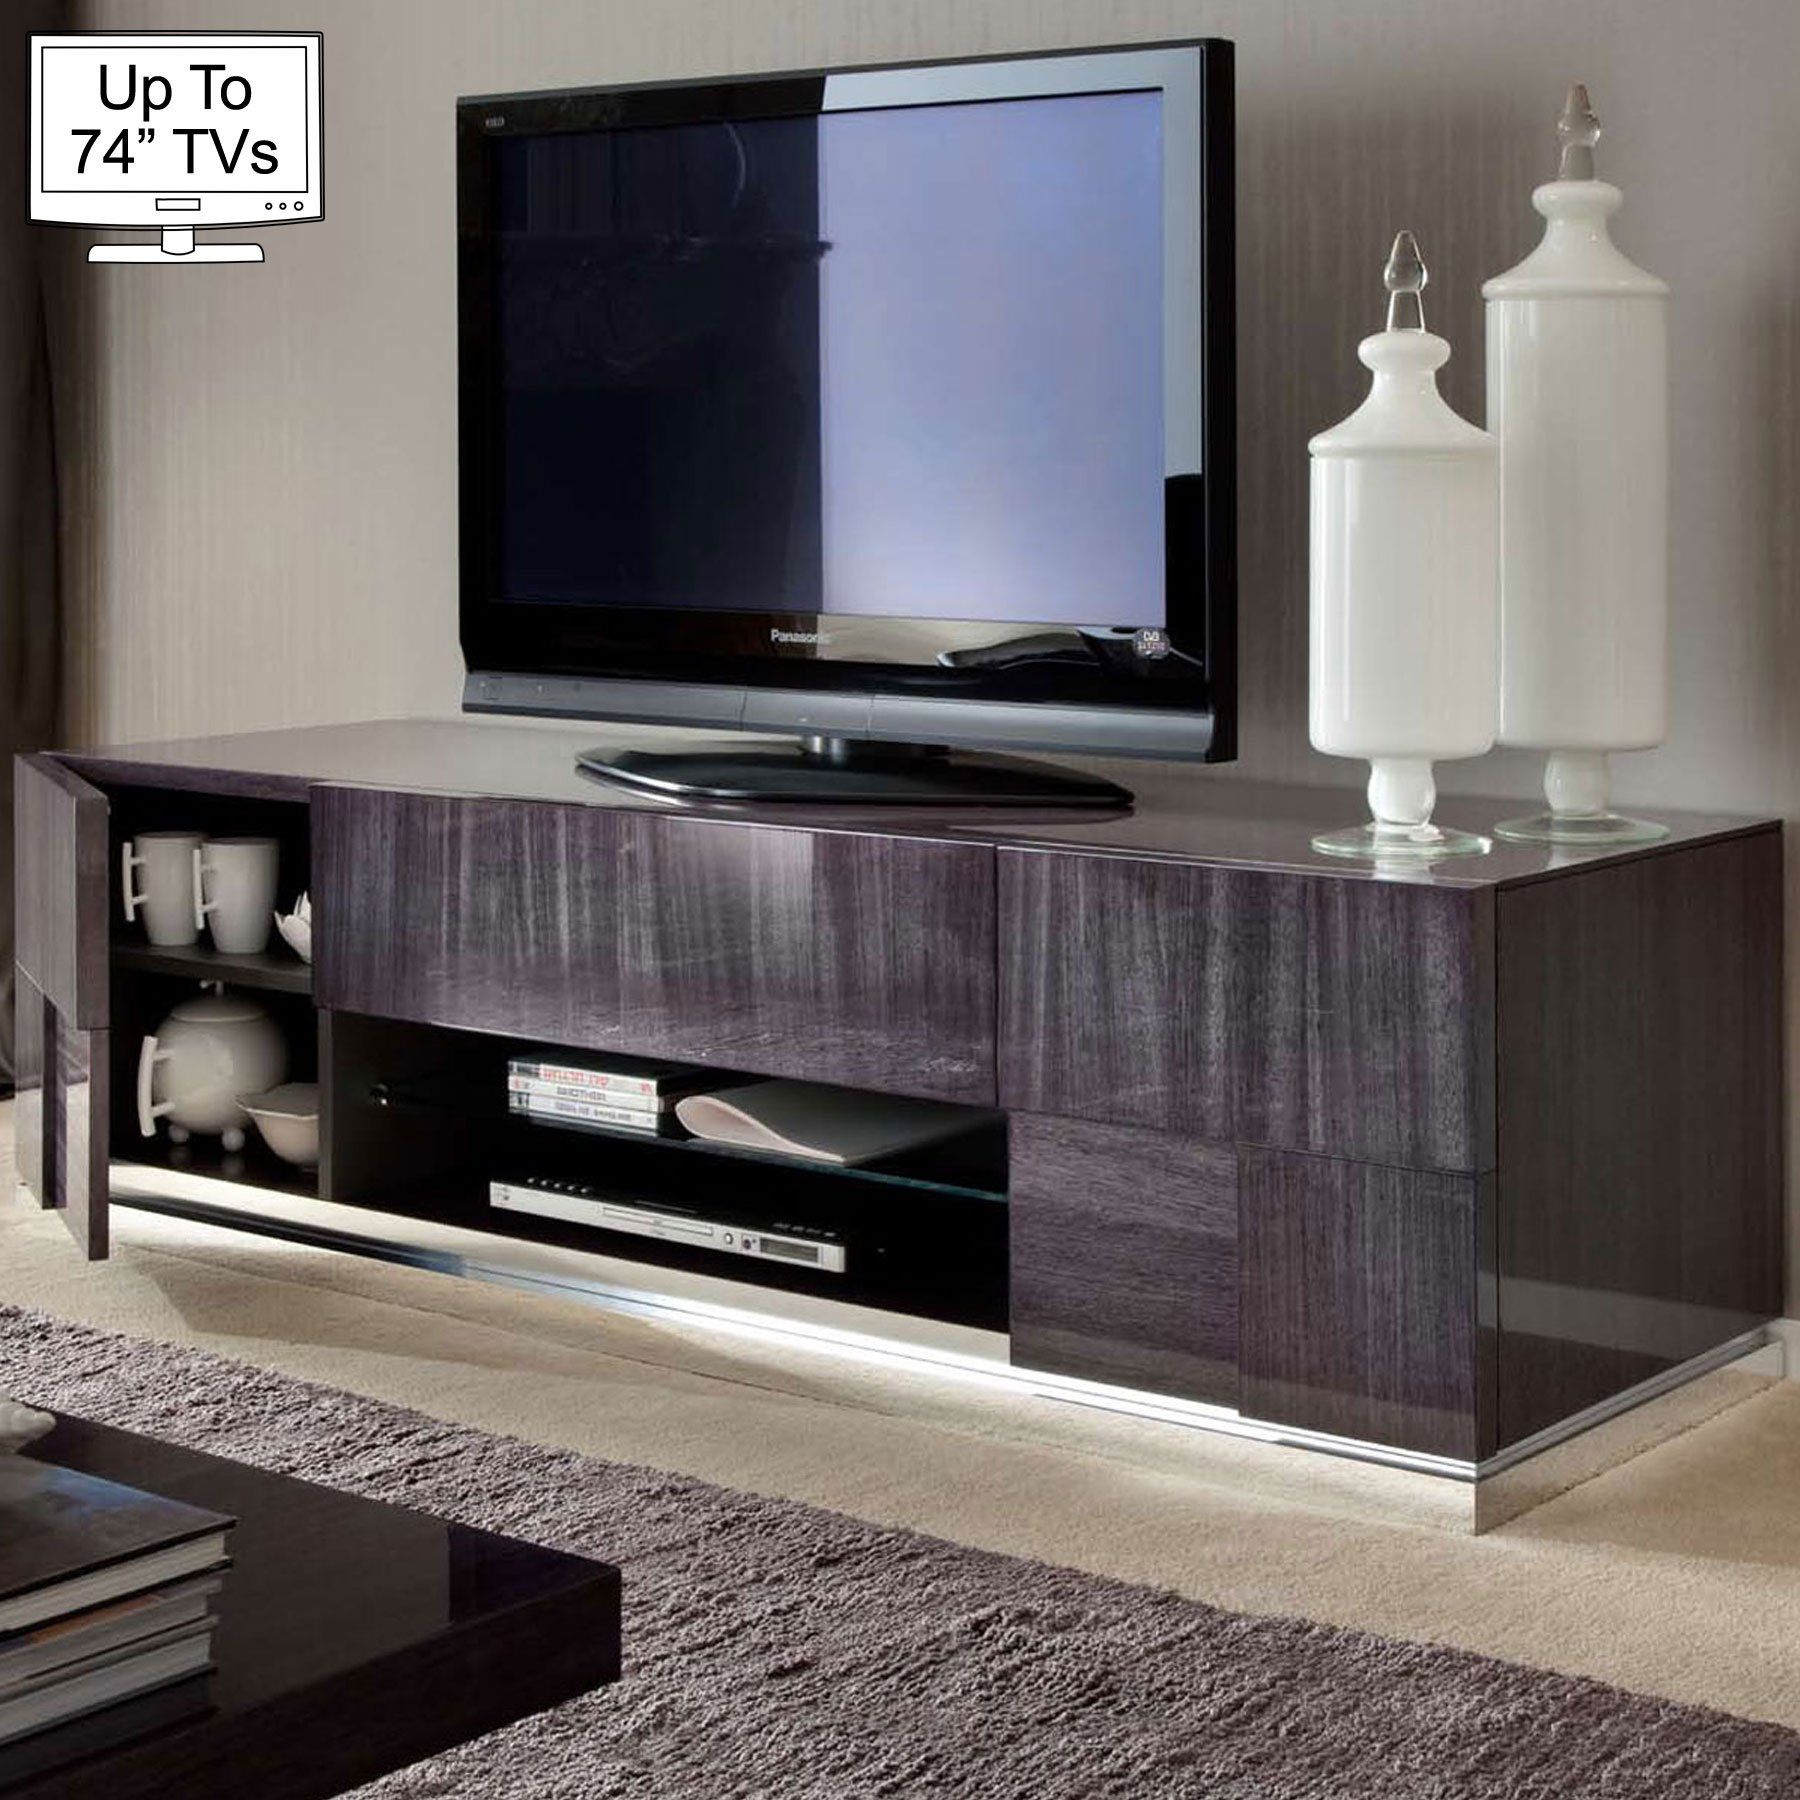 Monza High Gloss Tv Stand For Up To 74" Tvs Inside Cafe Tv Stands With Storage (View 12 of 15)